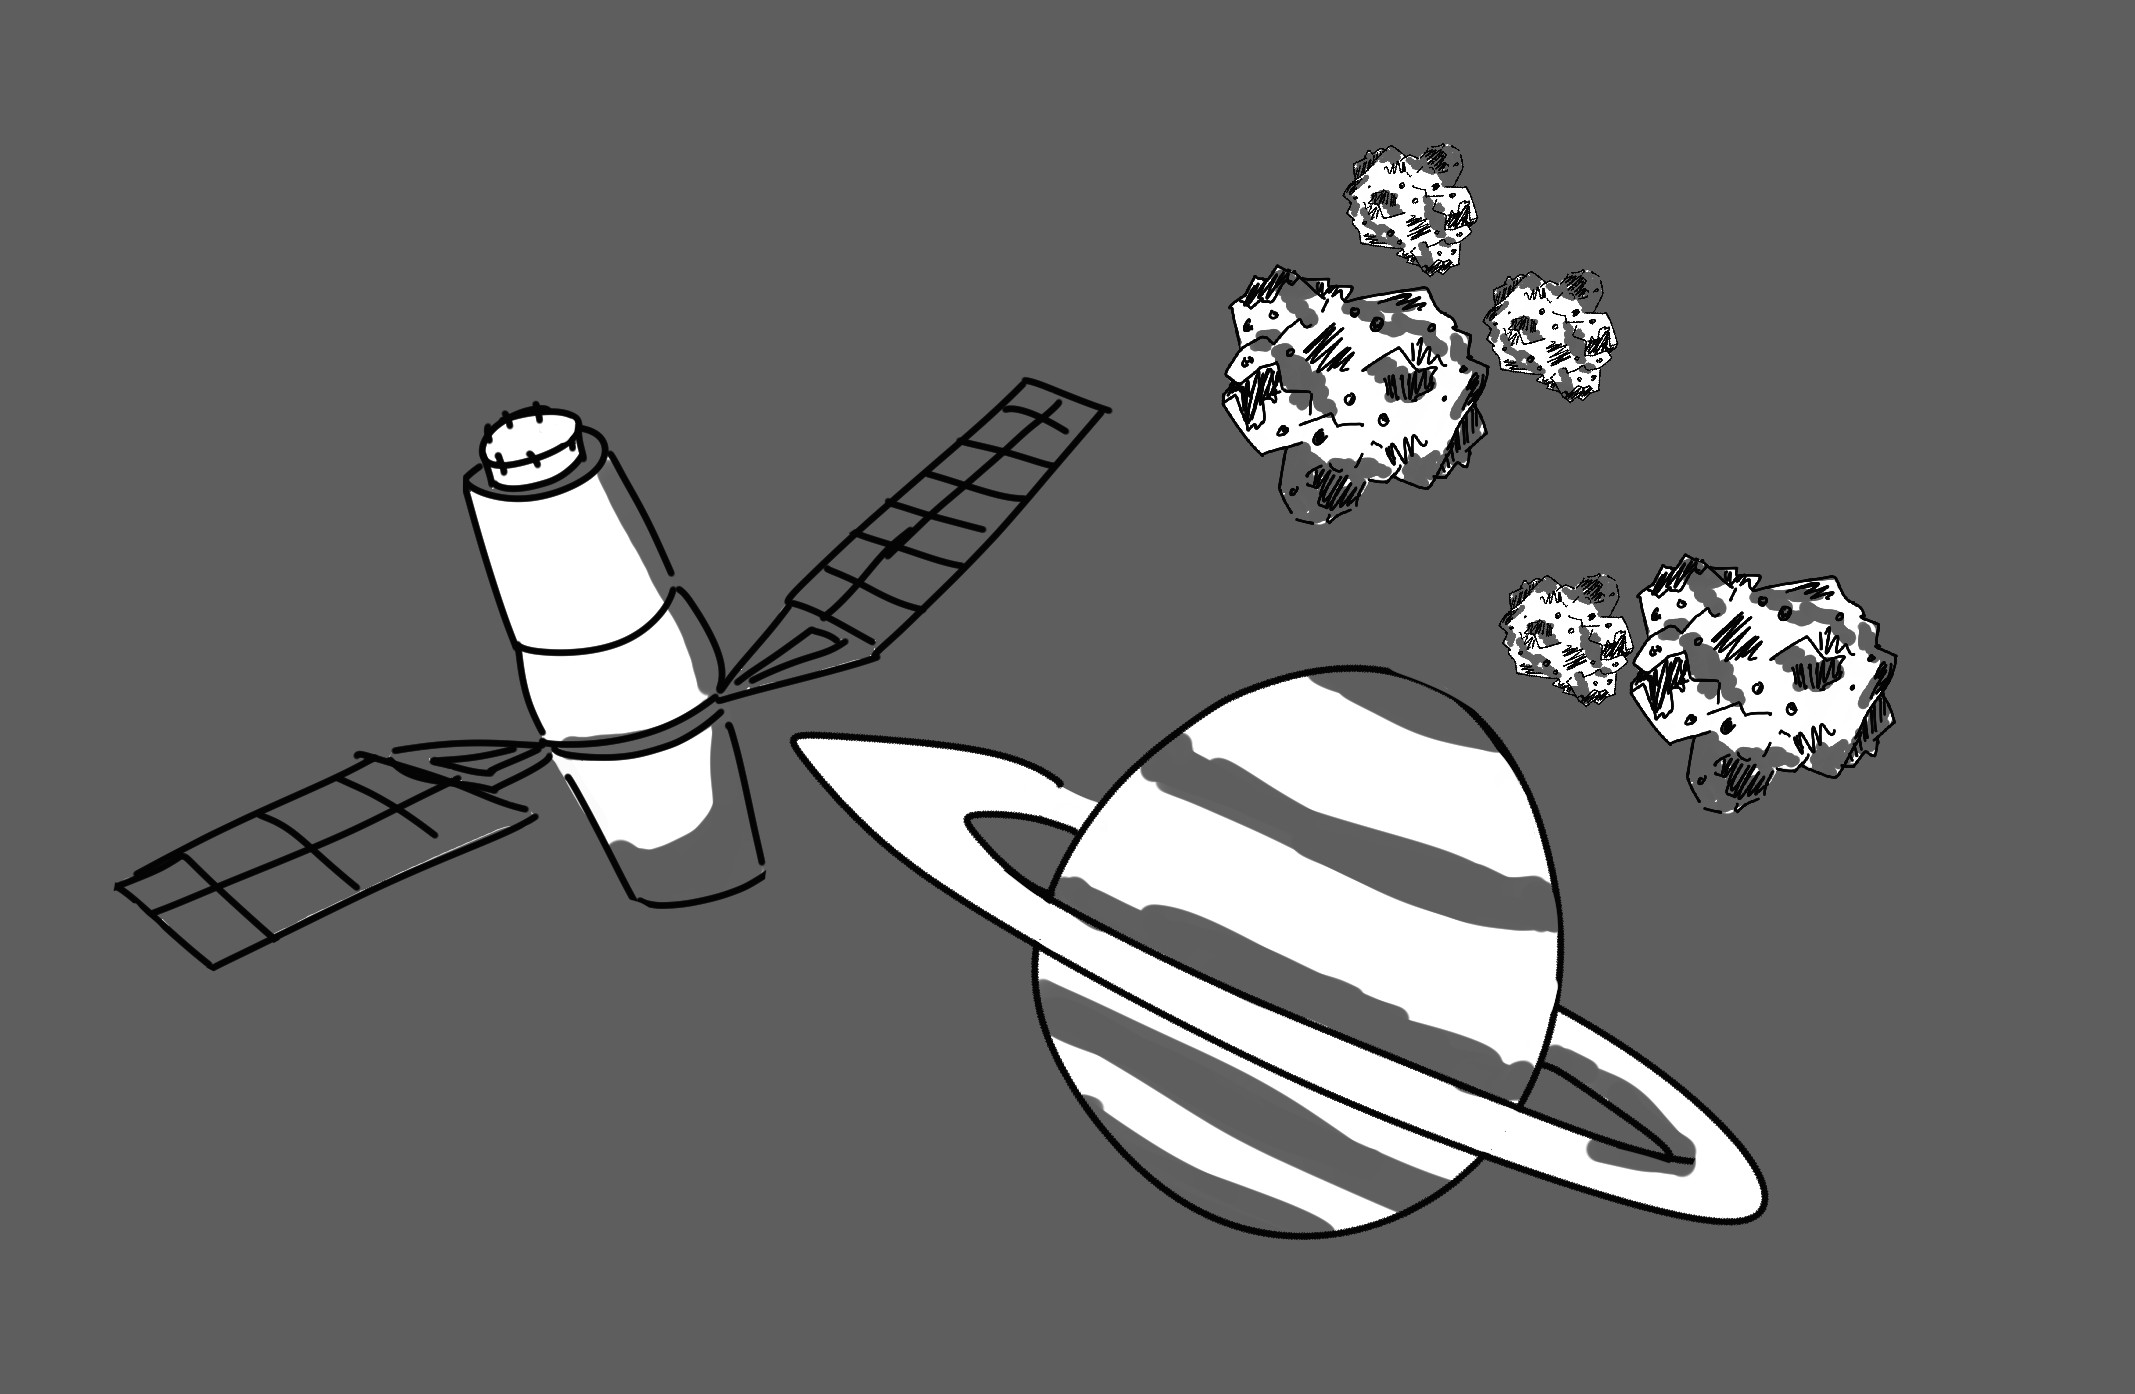 Beach Day Studios
Assets for a space inspired level